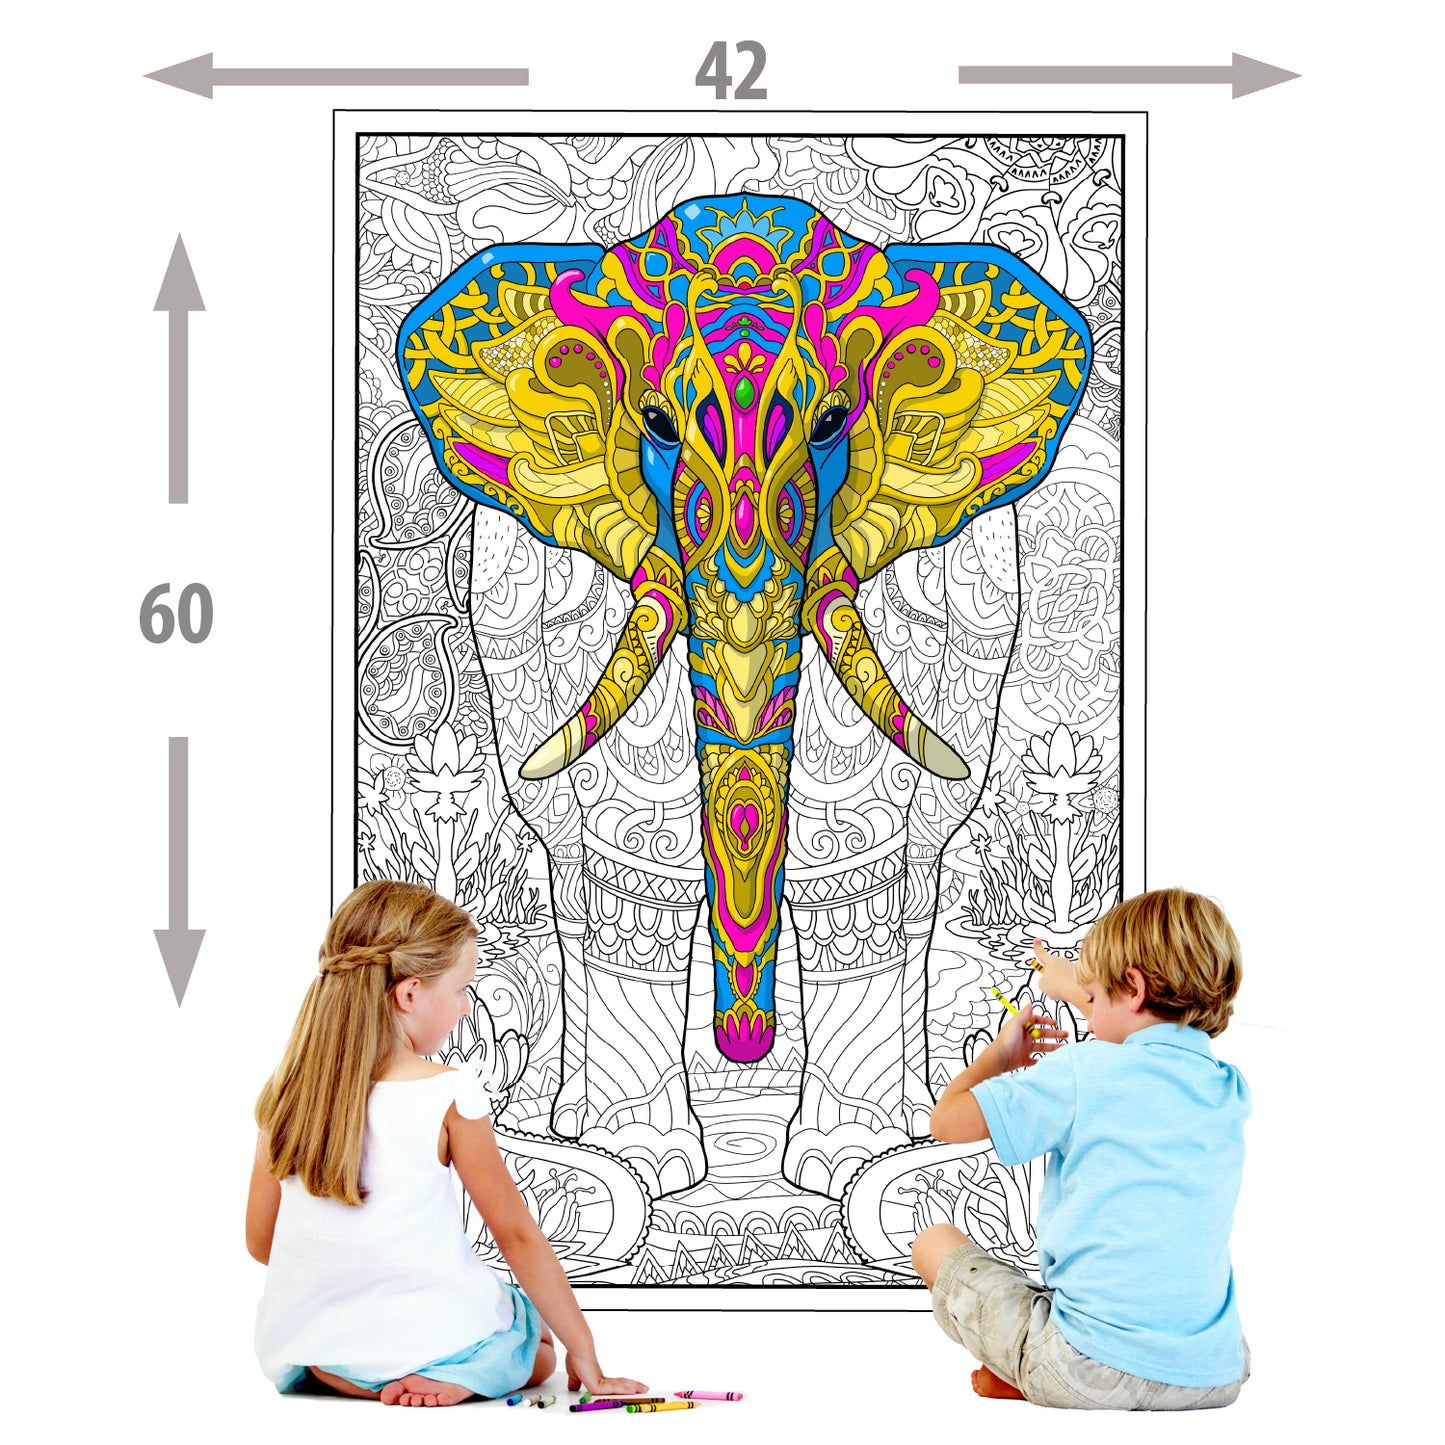 Giant Coloring Poster of Elephant Motif with flowers and mandalas collages Young N Refind